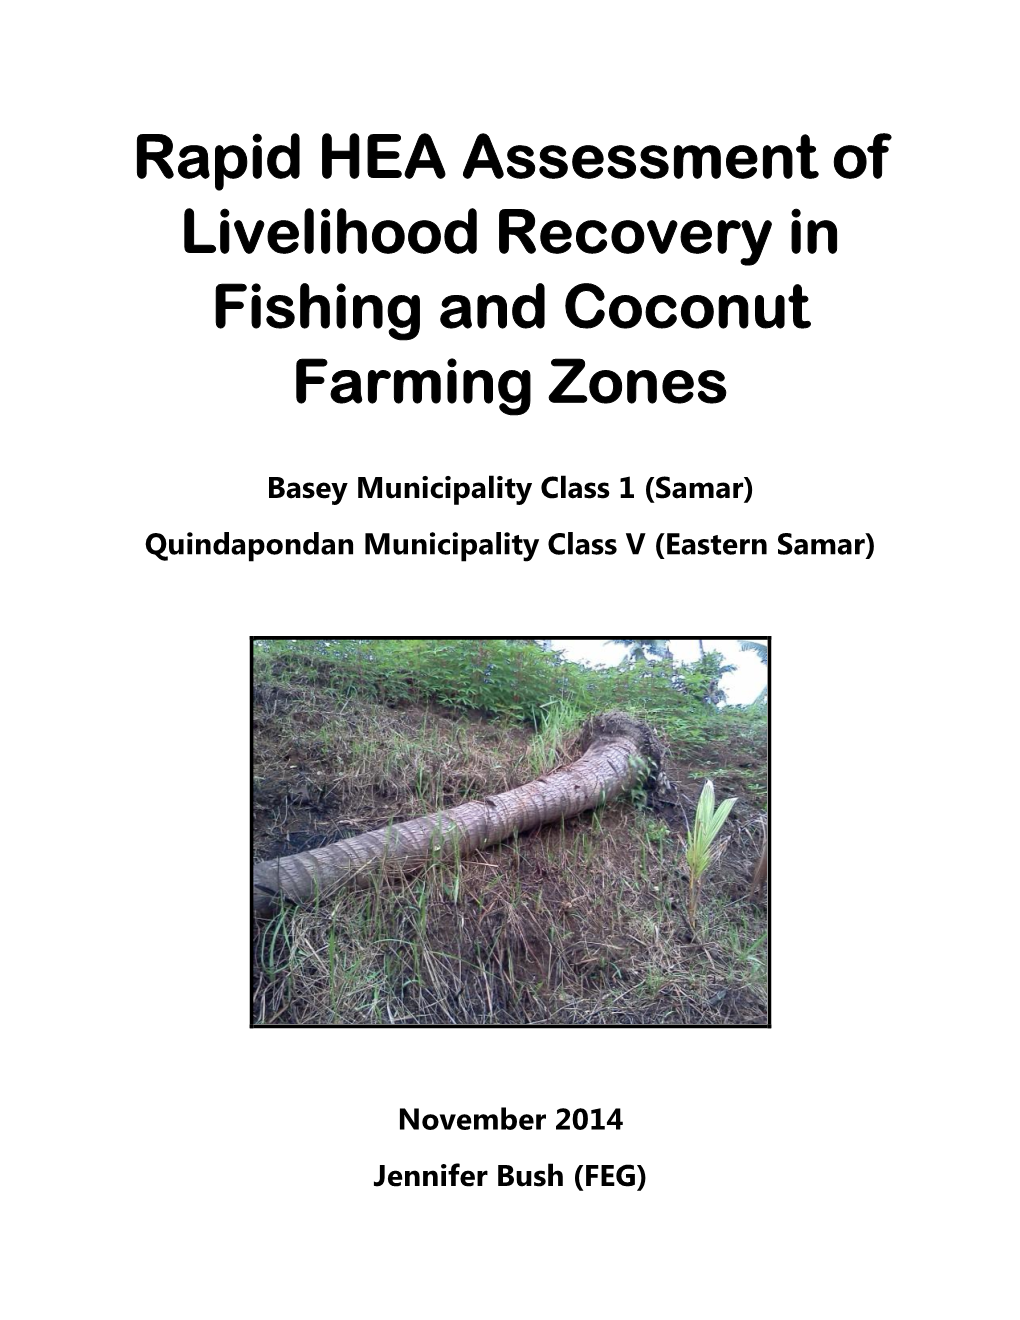 Rapid HEA Assessment of Livelihoods Recovery in Samar, Philippines 2014